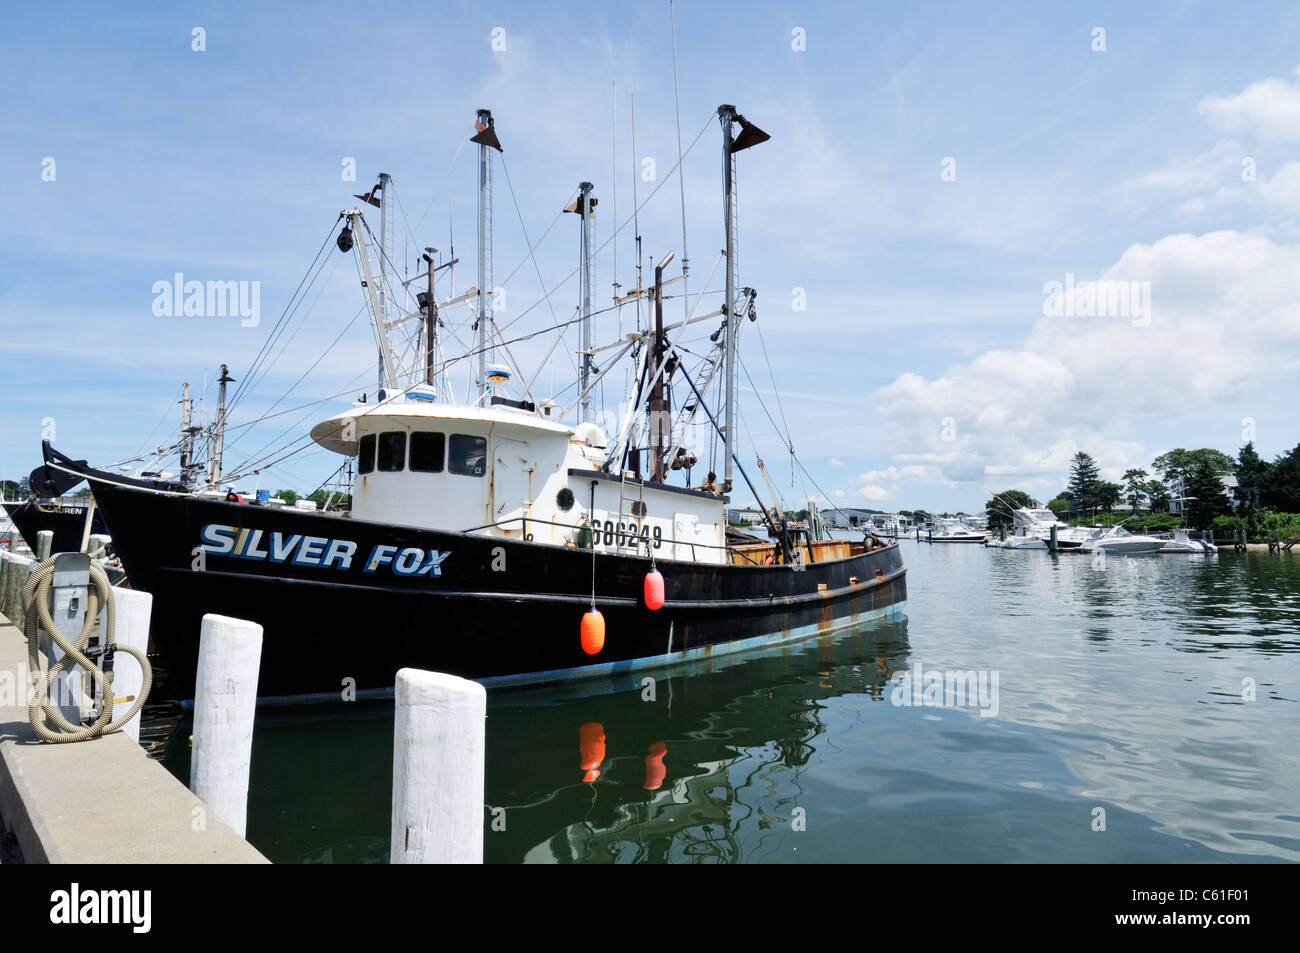 Fishing boat Silver Fox docked in Hyannis Harbor, Cape Cod, USA on a clear blue sky summer day. Stock Photo